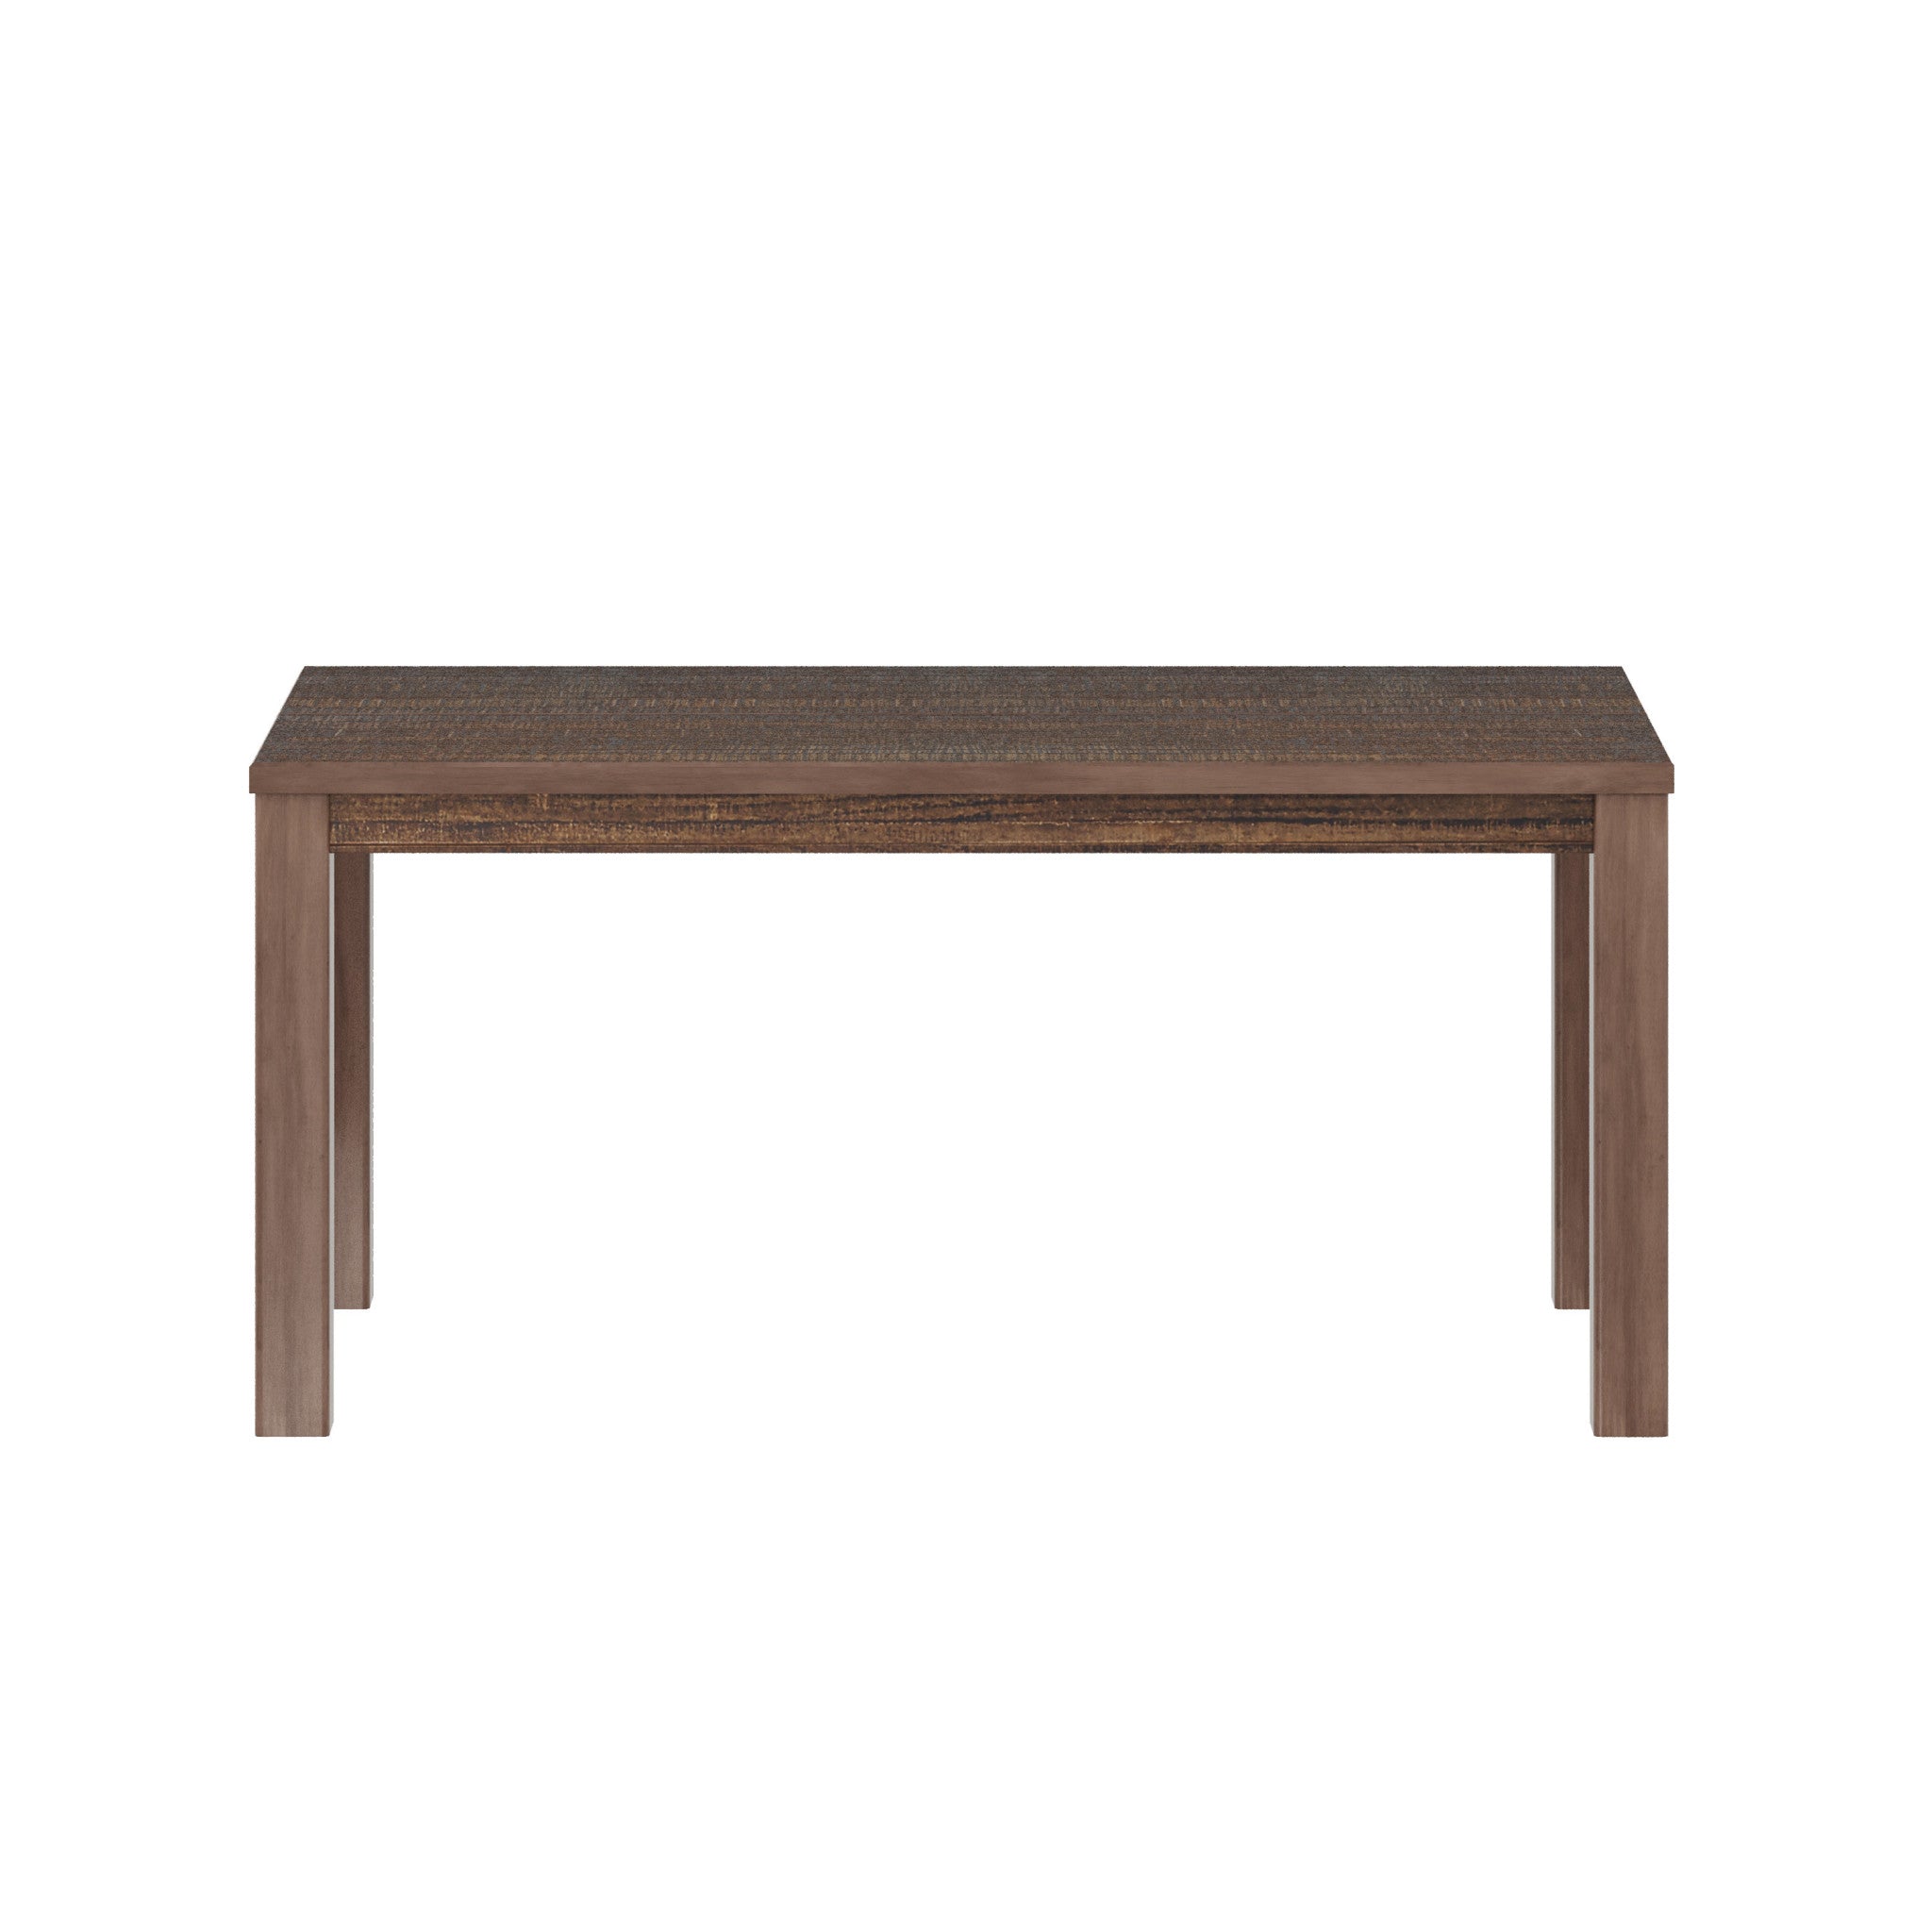 63" Espresso Solid Wood Dining Table